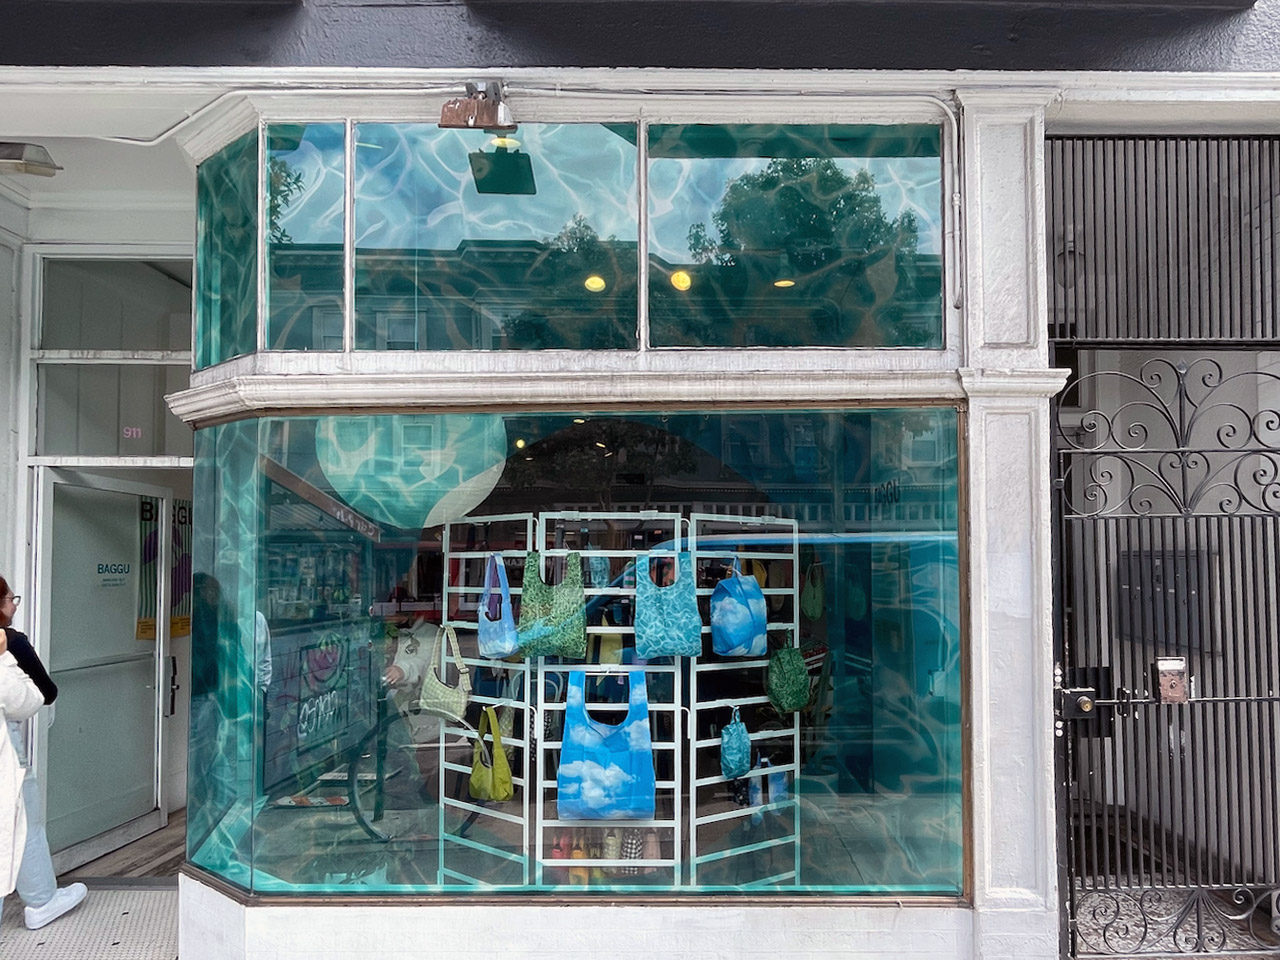 Baggu storefront showcasing custom window coverings installed by Martin Sign Company - a stunning underwater-themed design creating a captivating visual display.